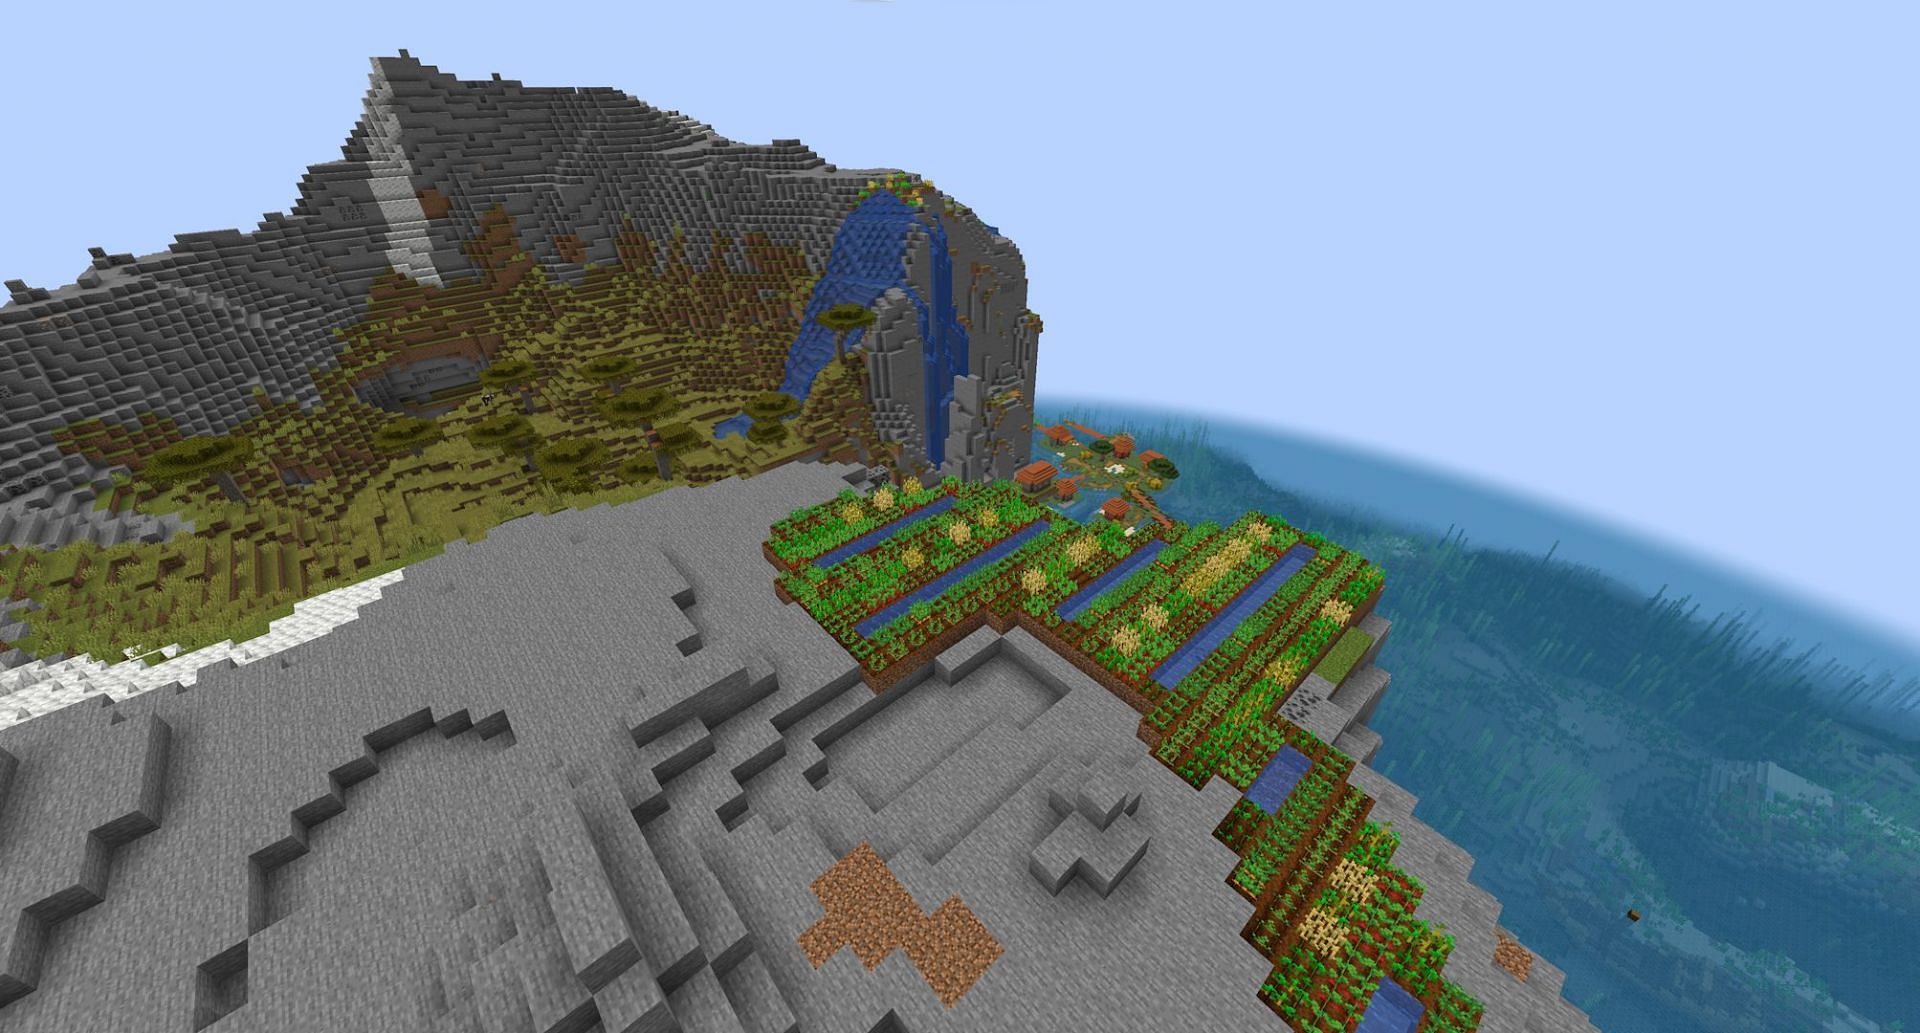 Cliff-top ocean view farm (image from Mojang)